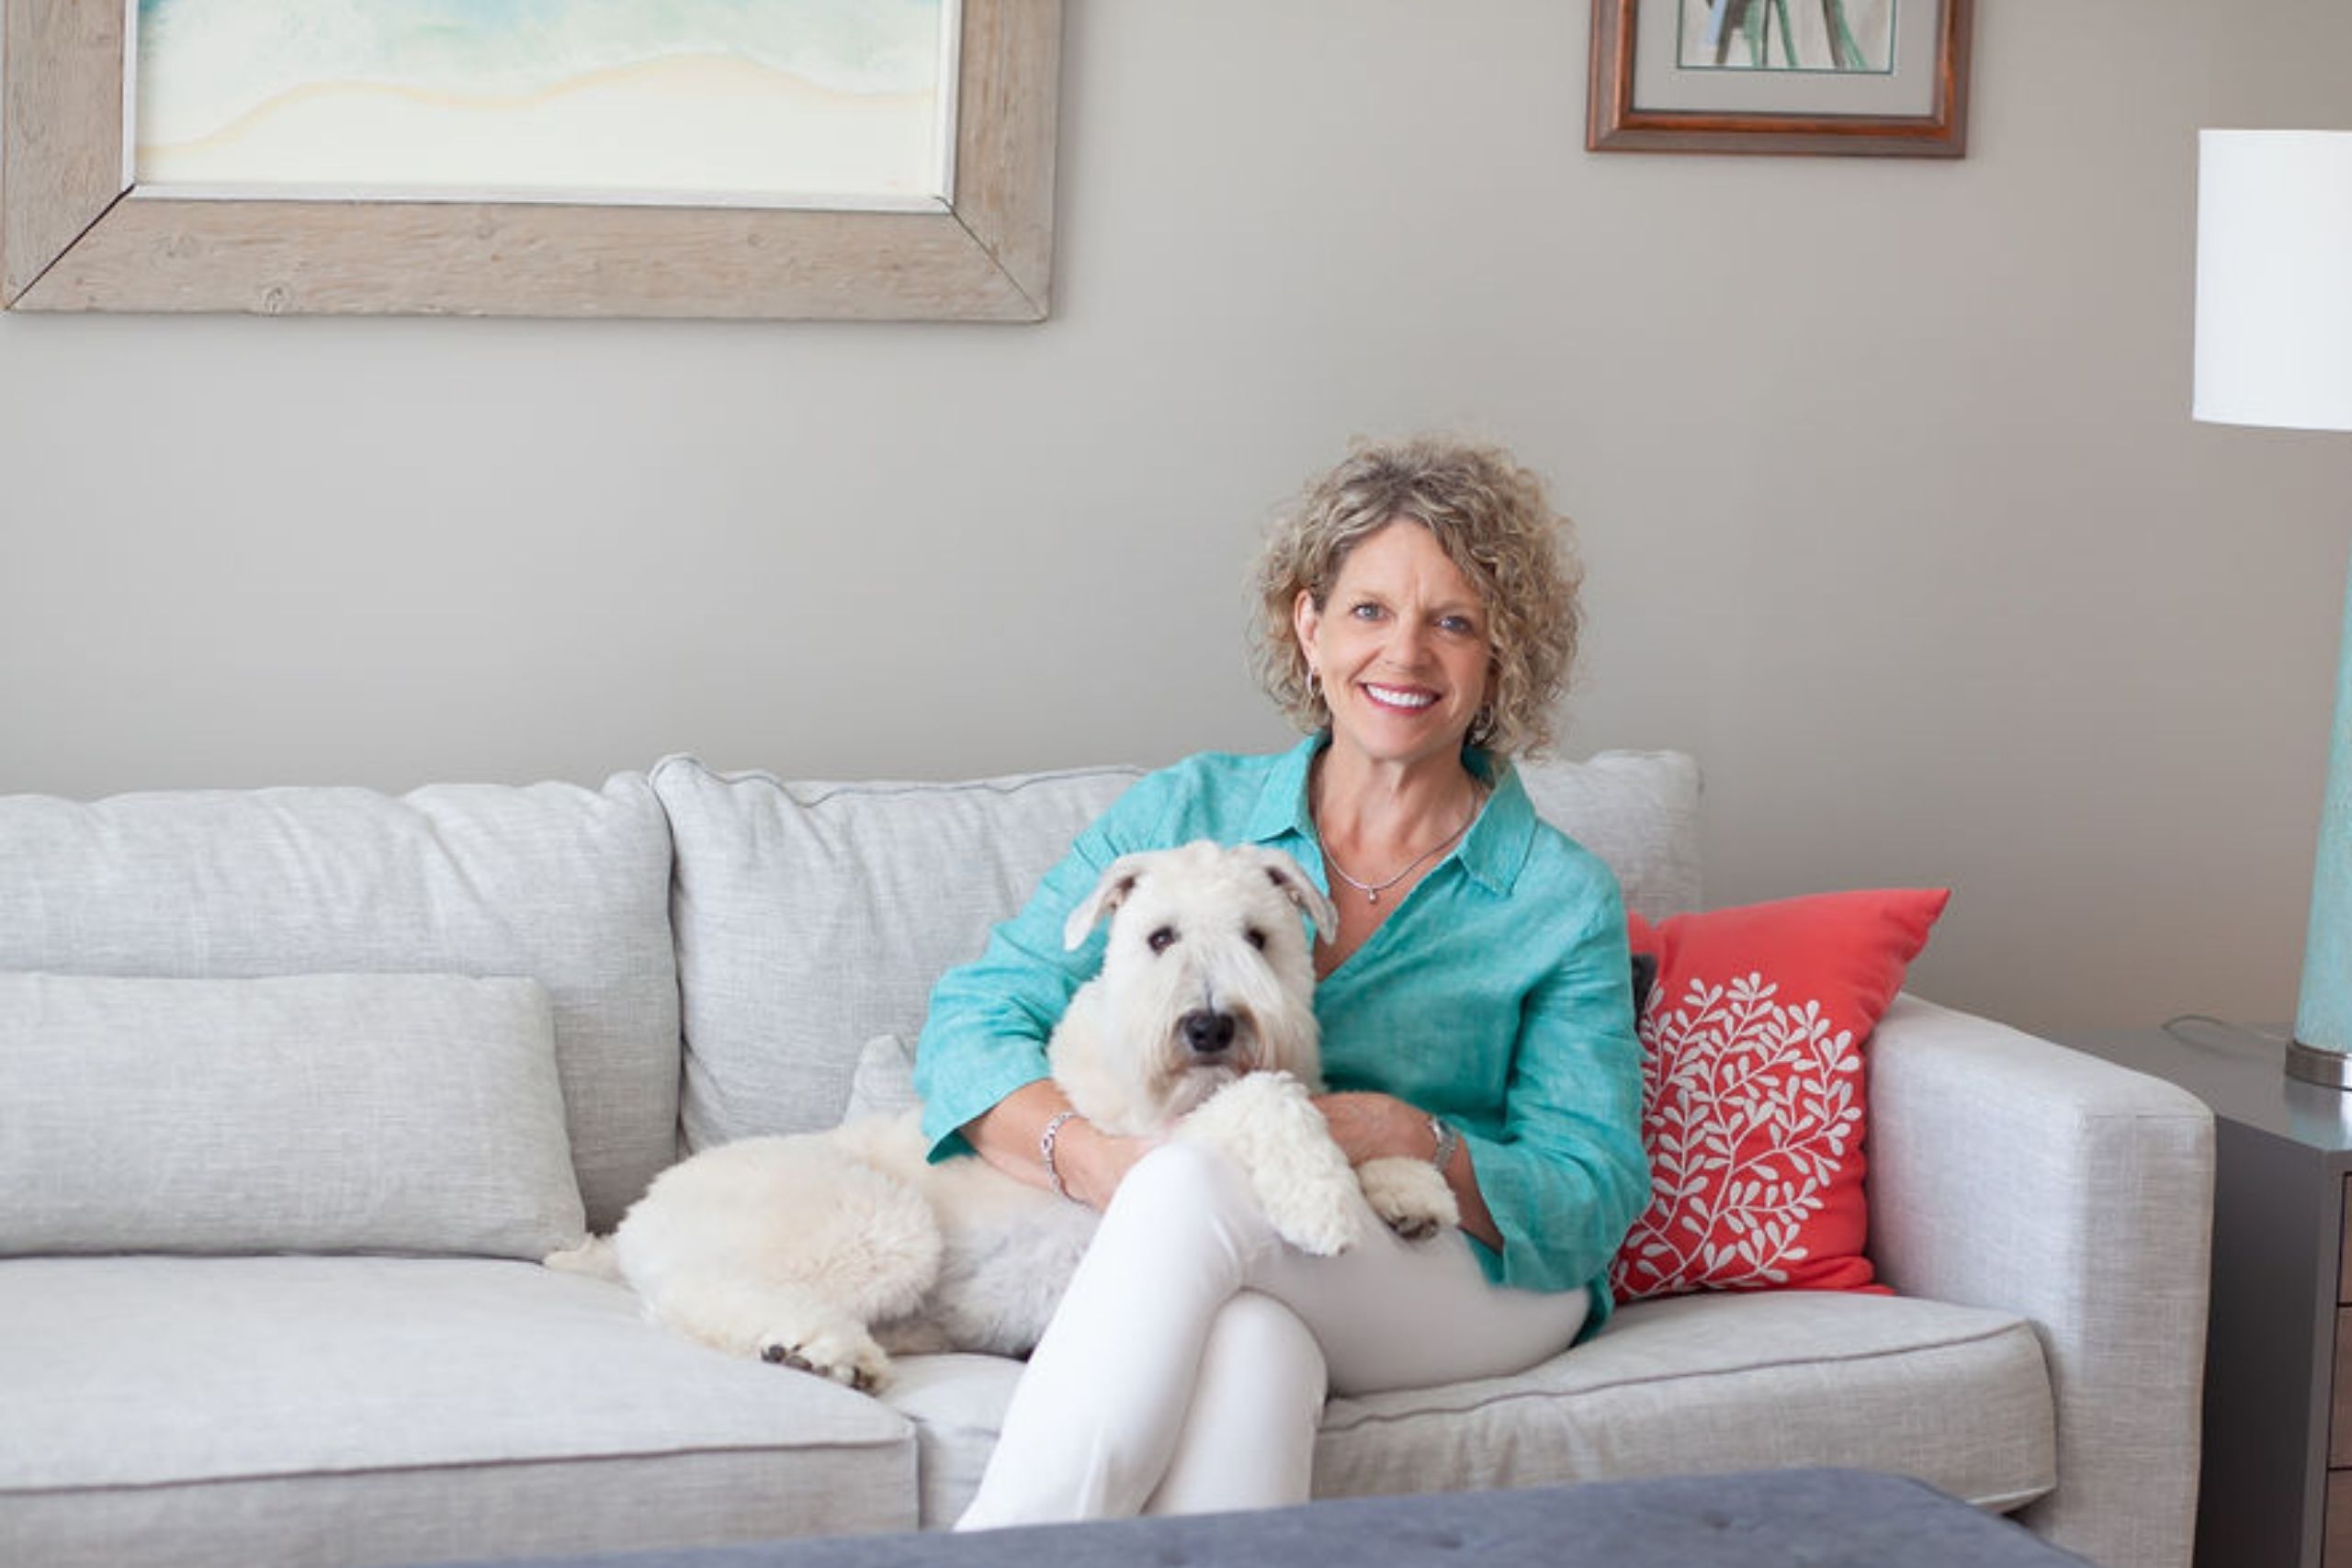 Rhonda sitting on a couch with her white dog